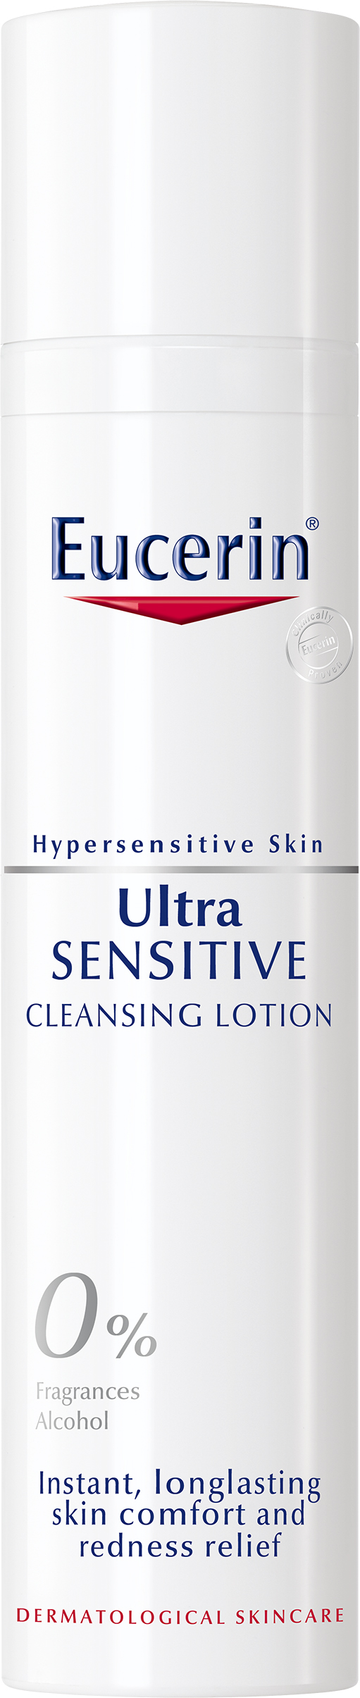 Eucerin Ultrasensitive cleansing lotion